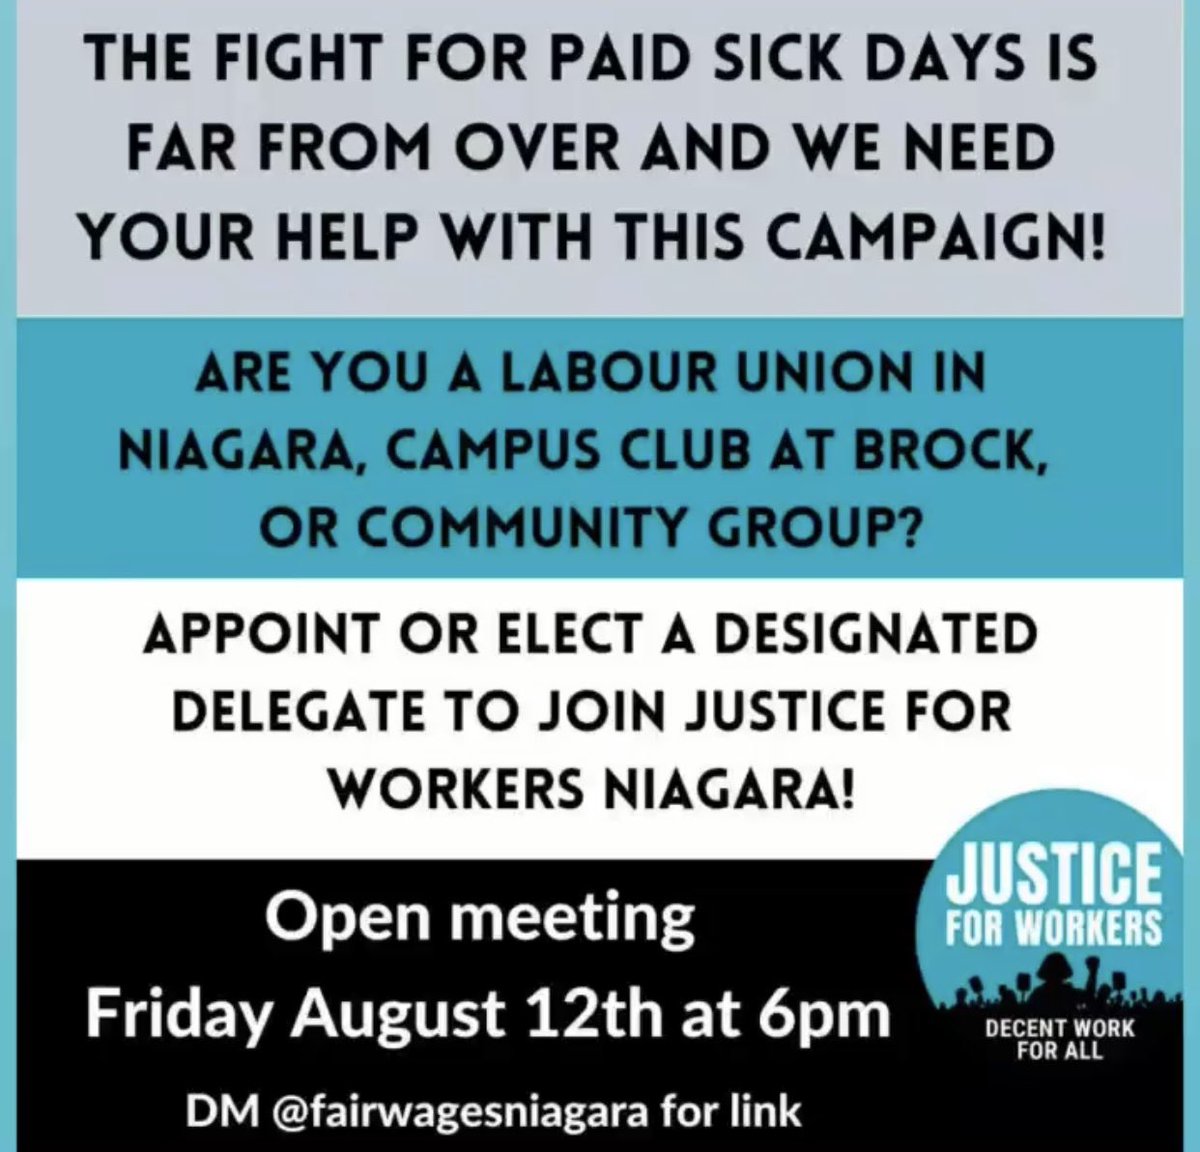 United we stand! Open meeting
Friday August 12th at 6pm. DM us (@fairwagesniagara) for
link!
#justice4workers
#fightfor15 #fightfor15andfairness
#fightfor15andfairnessniagara #workersrights #labourmovement #labourstruggles #NiagaraUnions #unions #BrockUniversity #StCatharines